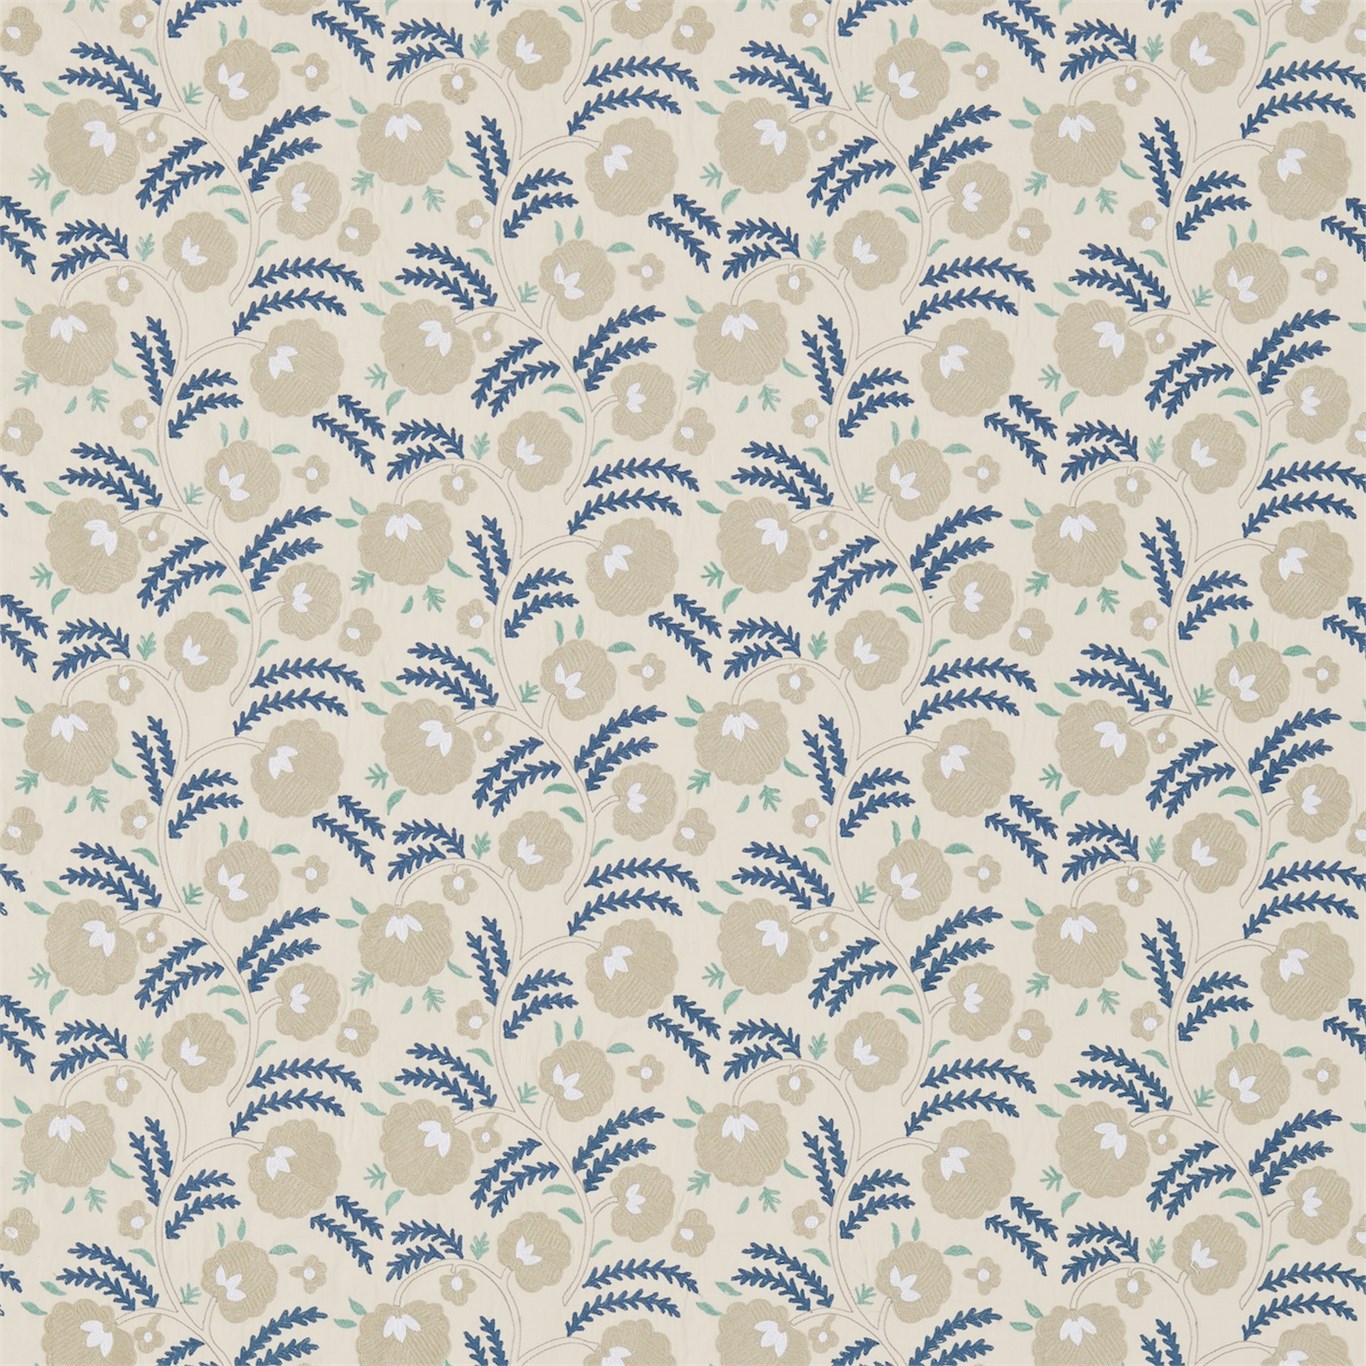 Wightwick Embroidery Ecru/Mineral Blue Fabric by MOR